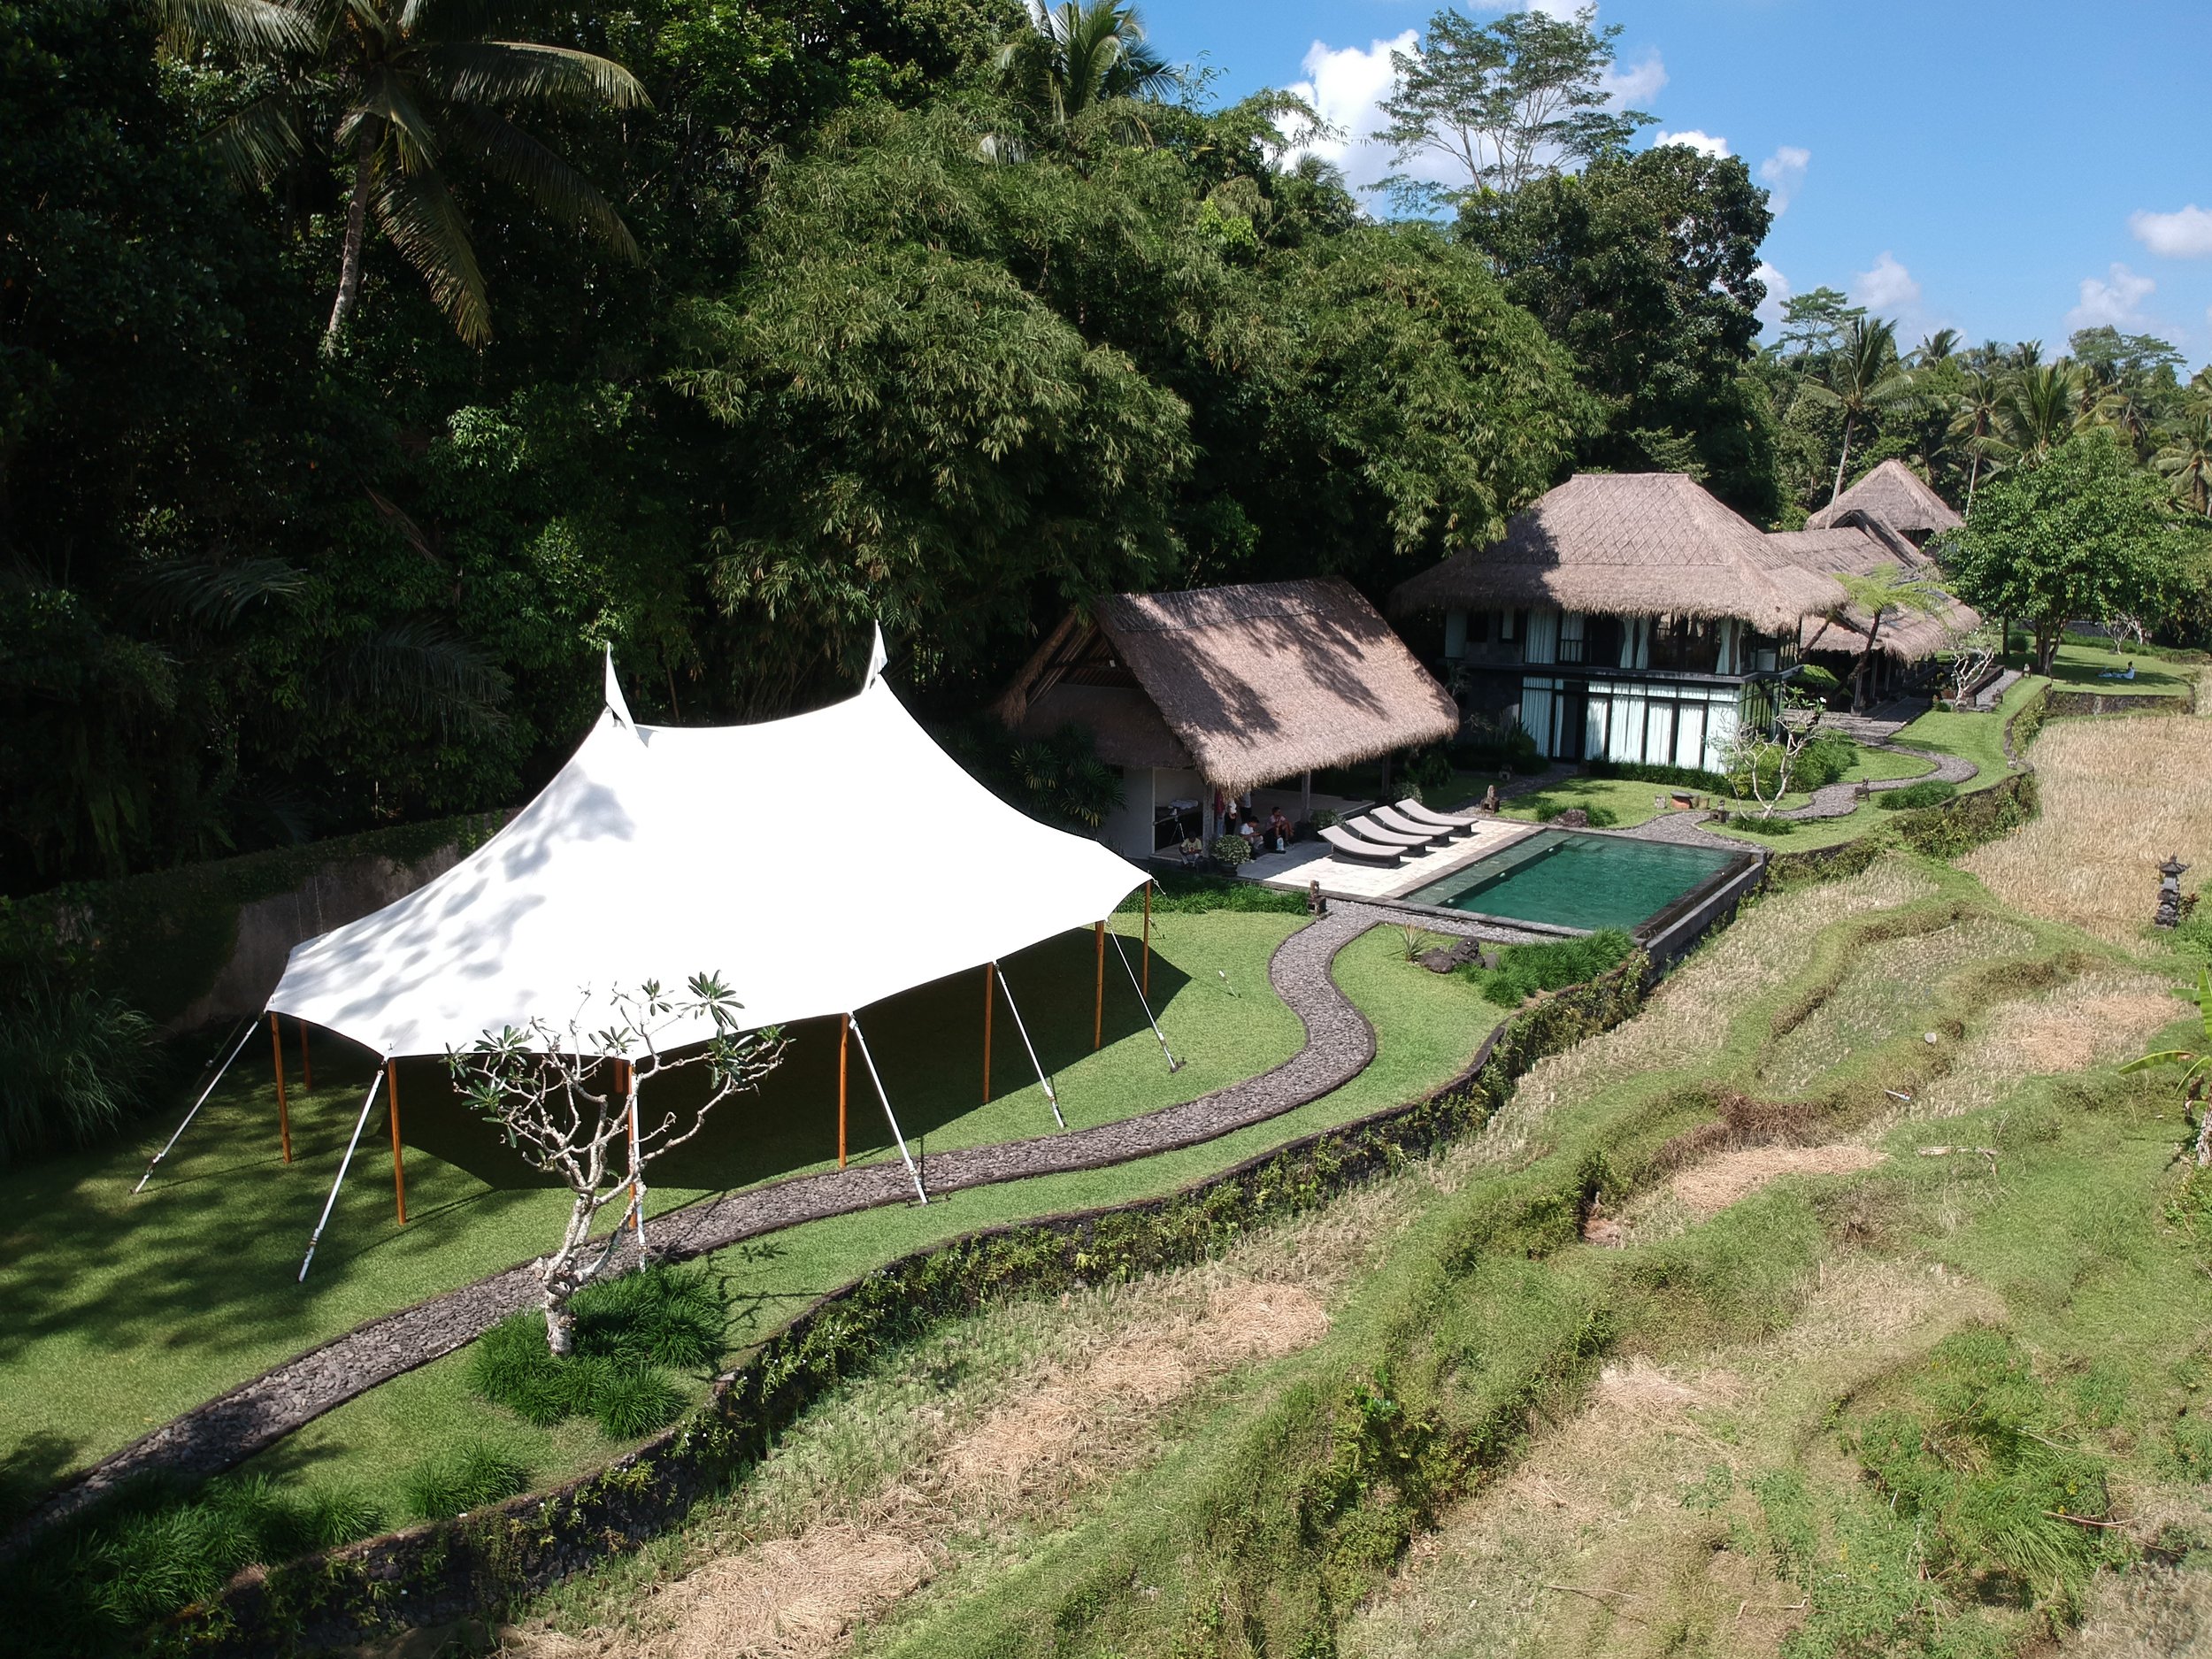 Overview of Villa Kelusa, Image from A Tent in Bali